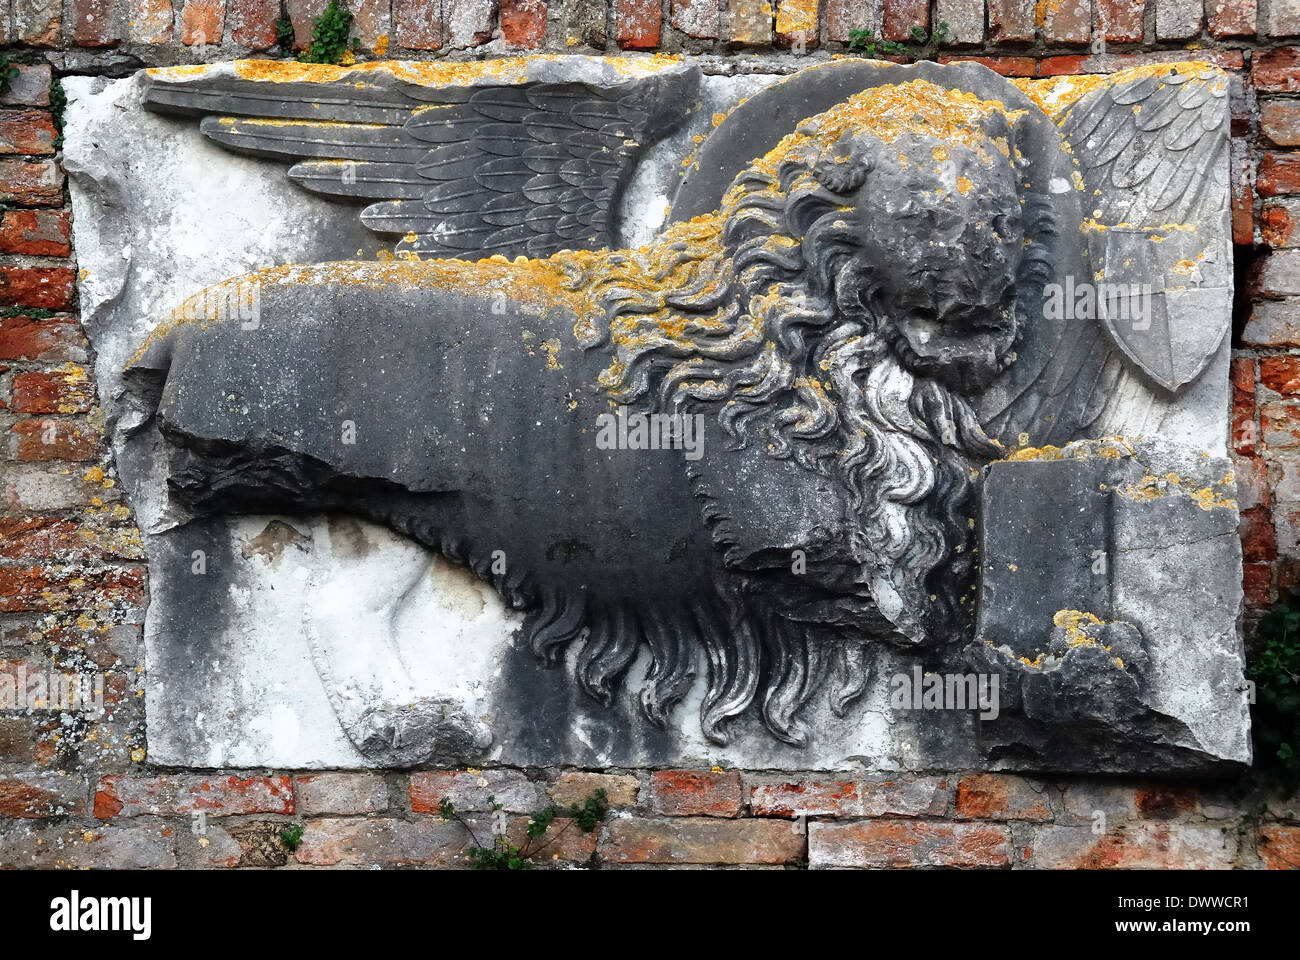 Venice lagoon, island of Torcello. The medieval museum : stone bas-relief depicting the lion of St. Mark (leone di San Marco). Stock Photo